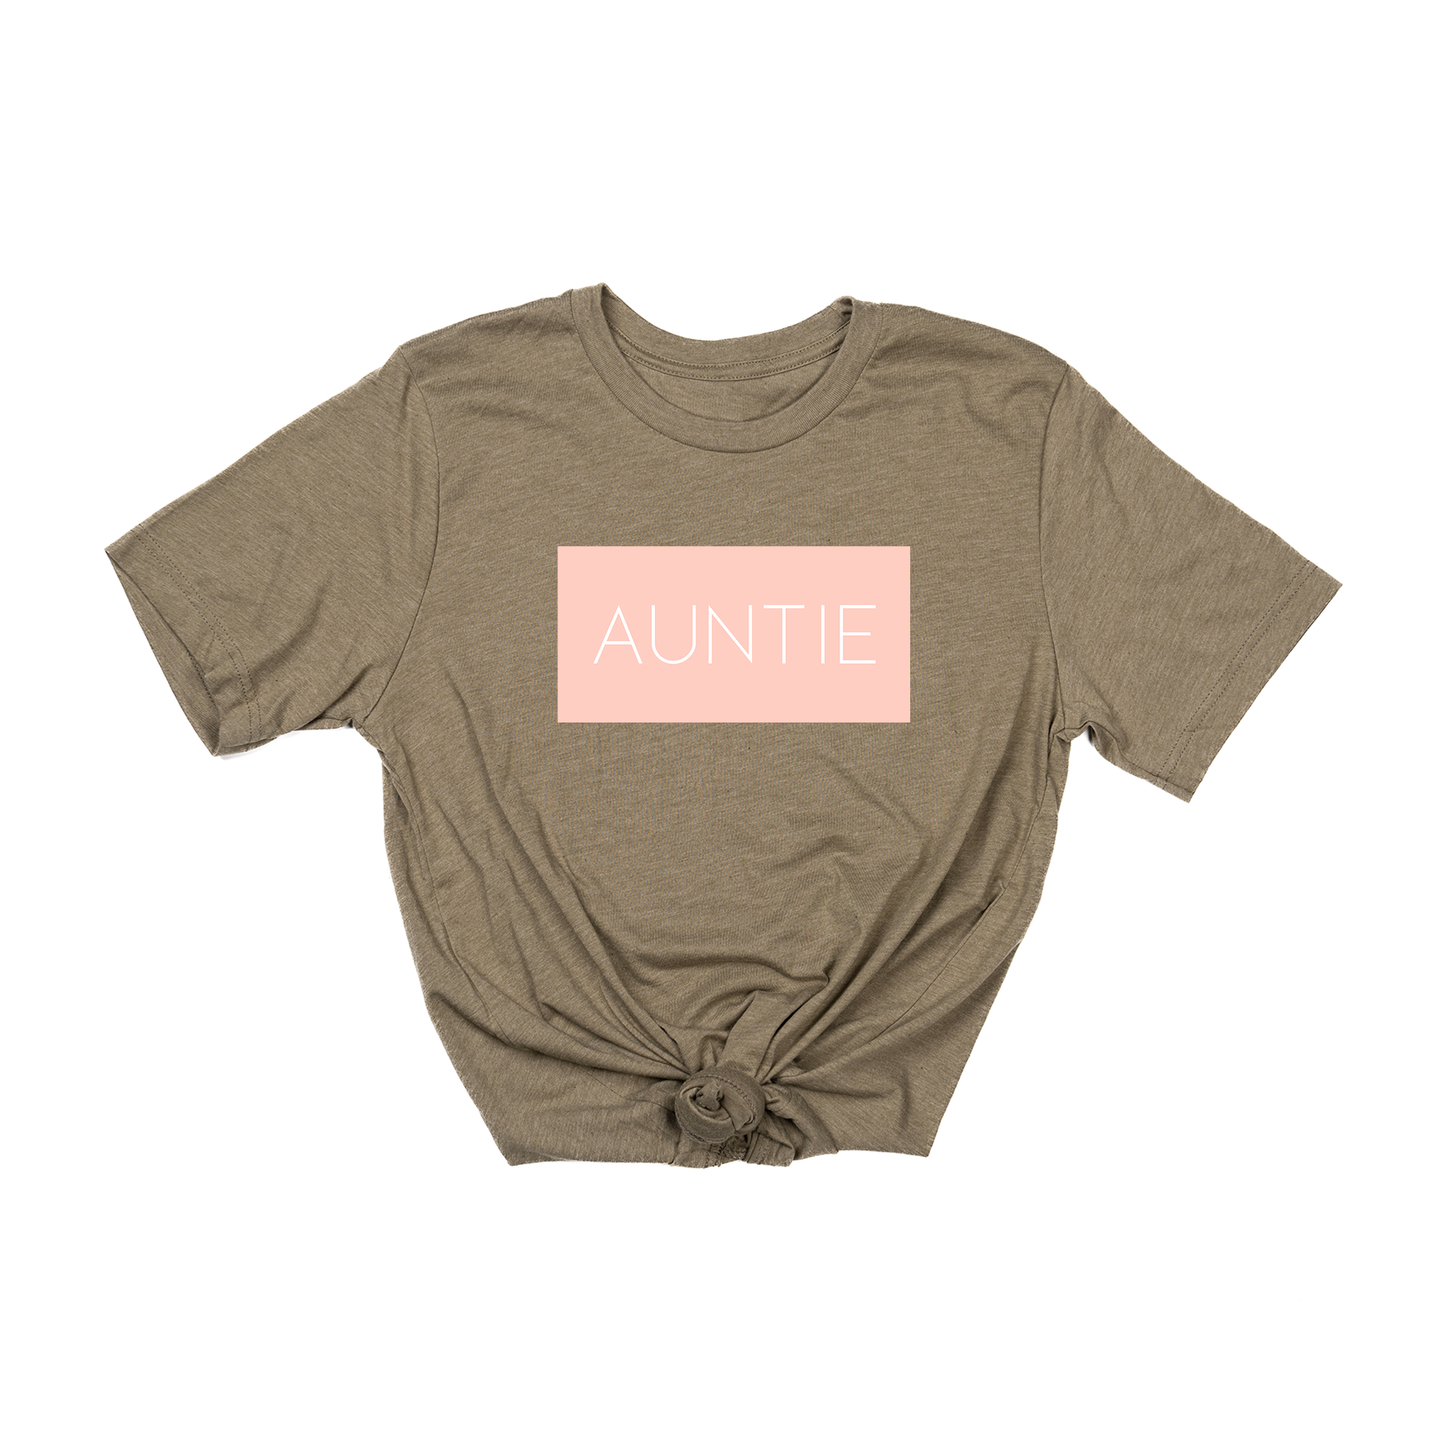 Auntie (Boxed Collection, Ballerina Pink Box/White Text, Across Front) - Tee (Olive)